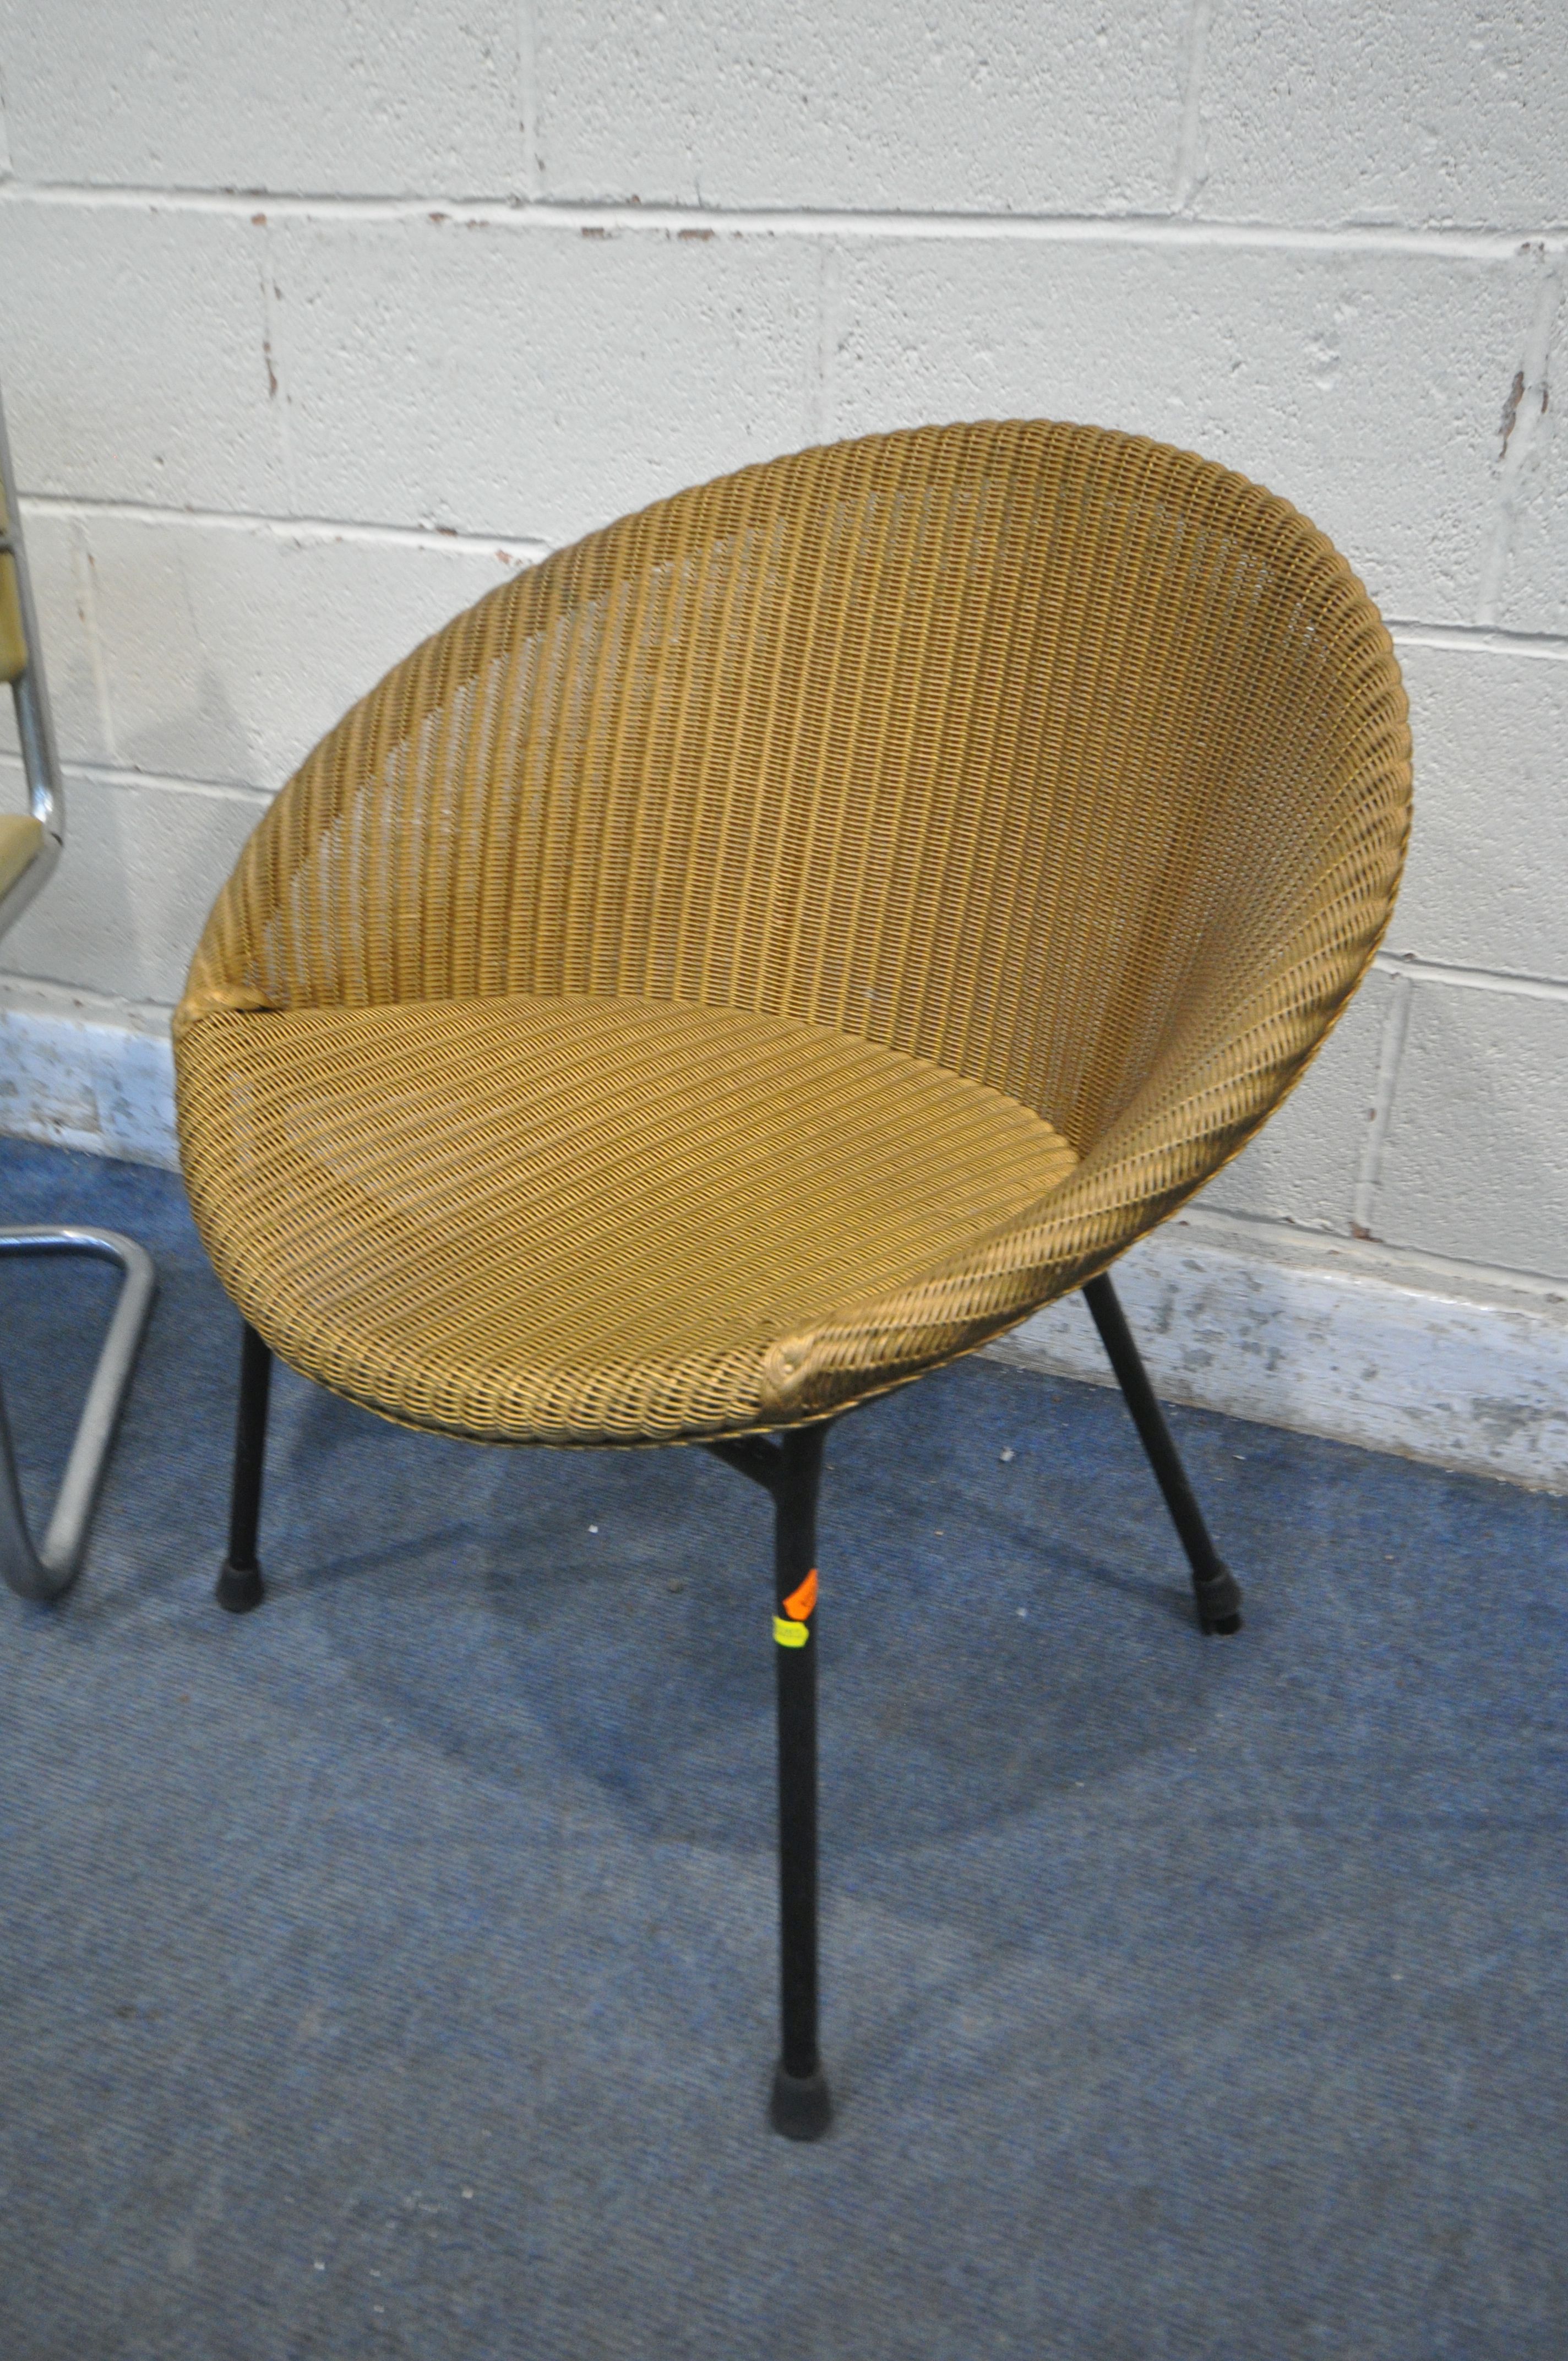 A LLOYD LOOM WICKER SATELLITE CHAIR, on metal legs, along with a mid-century cream leatherette and - Image 2 of 3